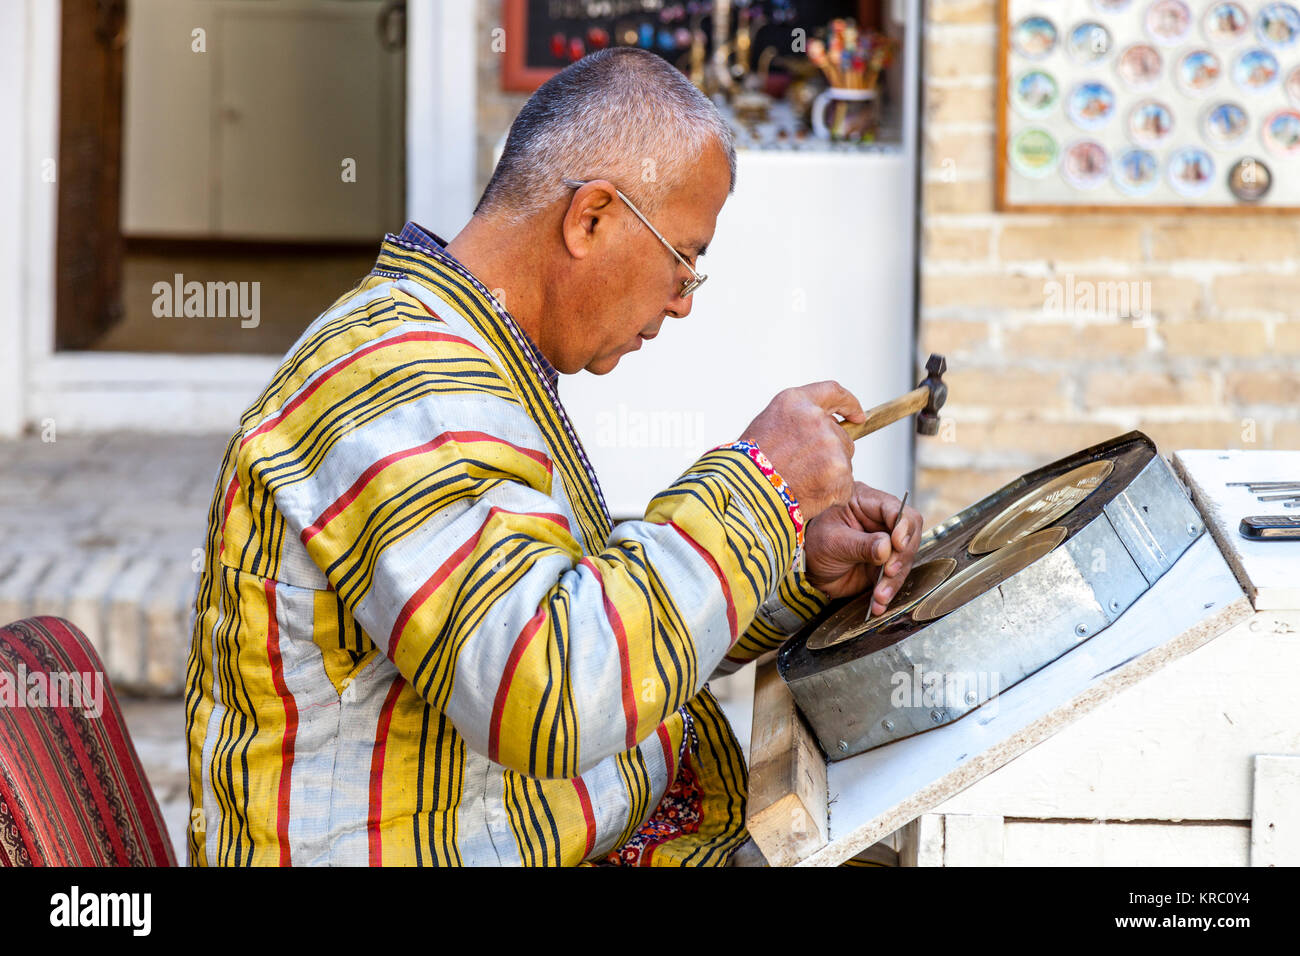 A Local Craftsman In Traditional Dress Engraving A Brass Plate In The Market, Bukhara, Uzbekistan Stock Photo